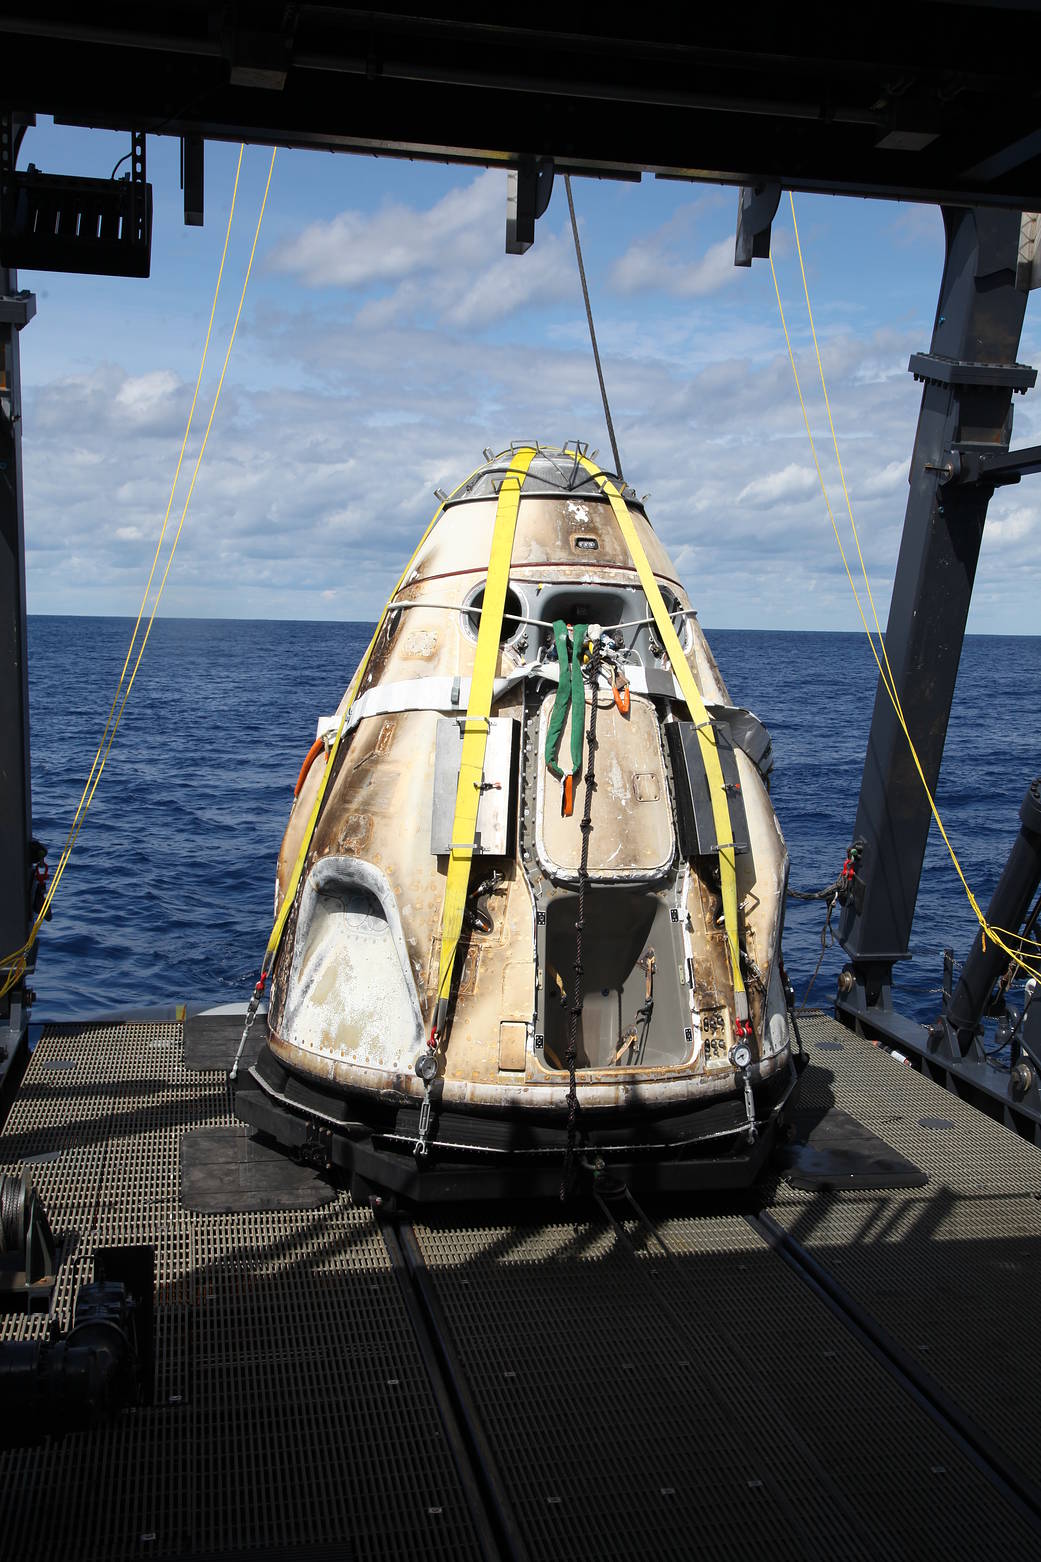 SpaceX’s Crew Dragon is loaded onto the company’s recovery ship, Go Searcher, in the Atlantic Ocean, about 200 miles off Florida’s east coast, on March 8, after returning from the International Space Station on the Demo-1 mission. 